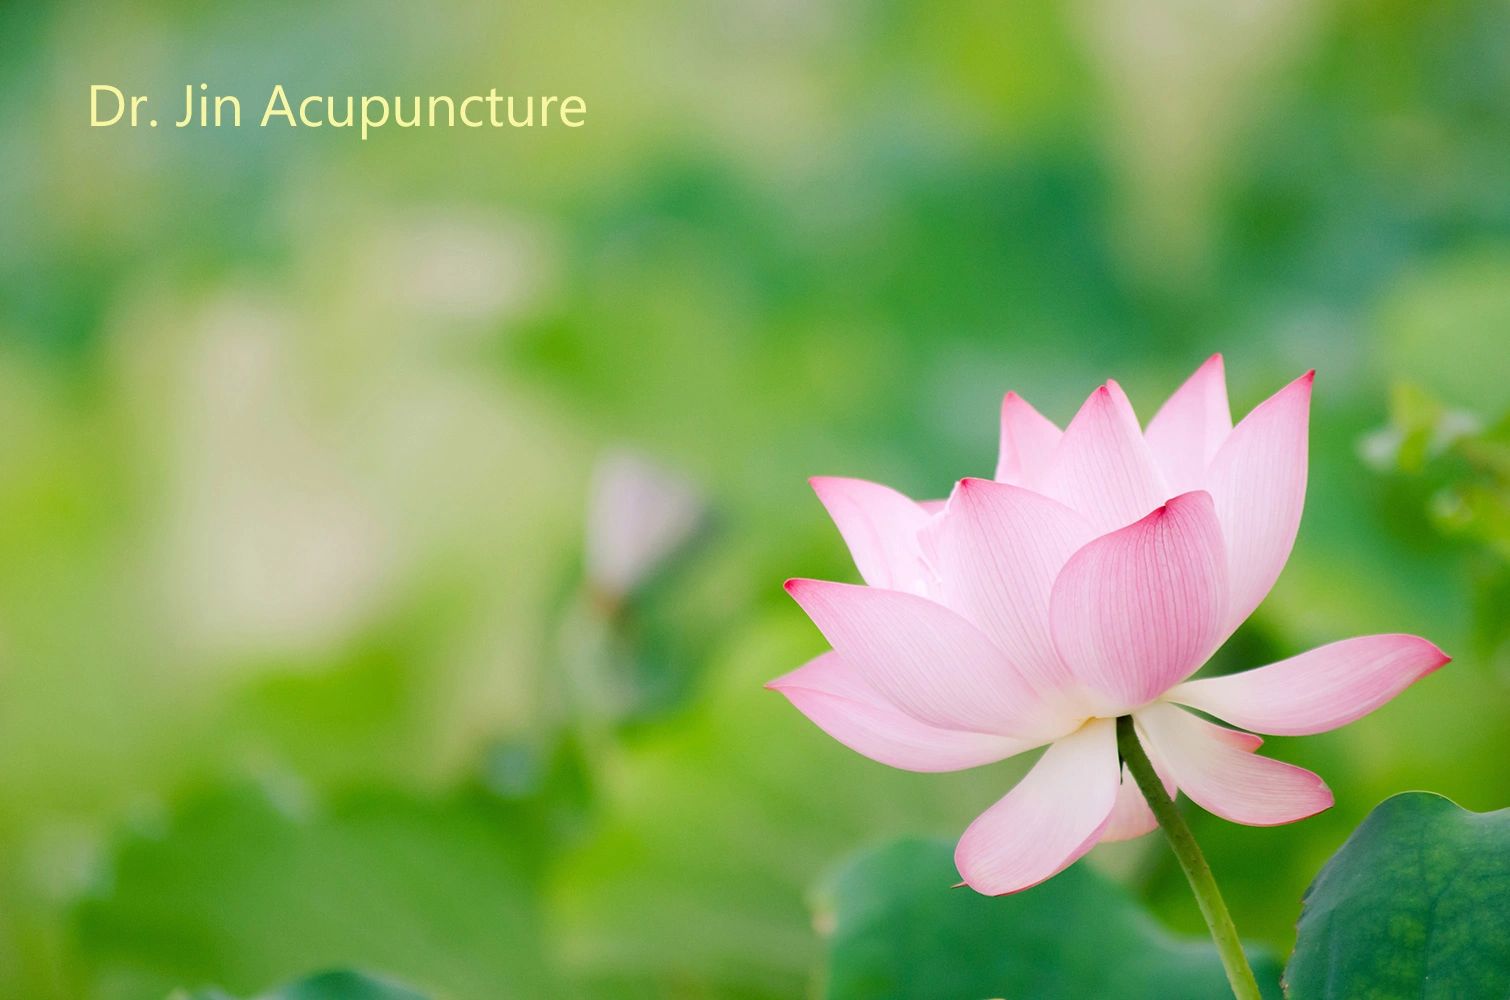 A beautiful lotus flower next to "Dr. Jin Acupuncture Clinic" in Carmel and Indianapolis, IN area.